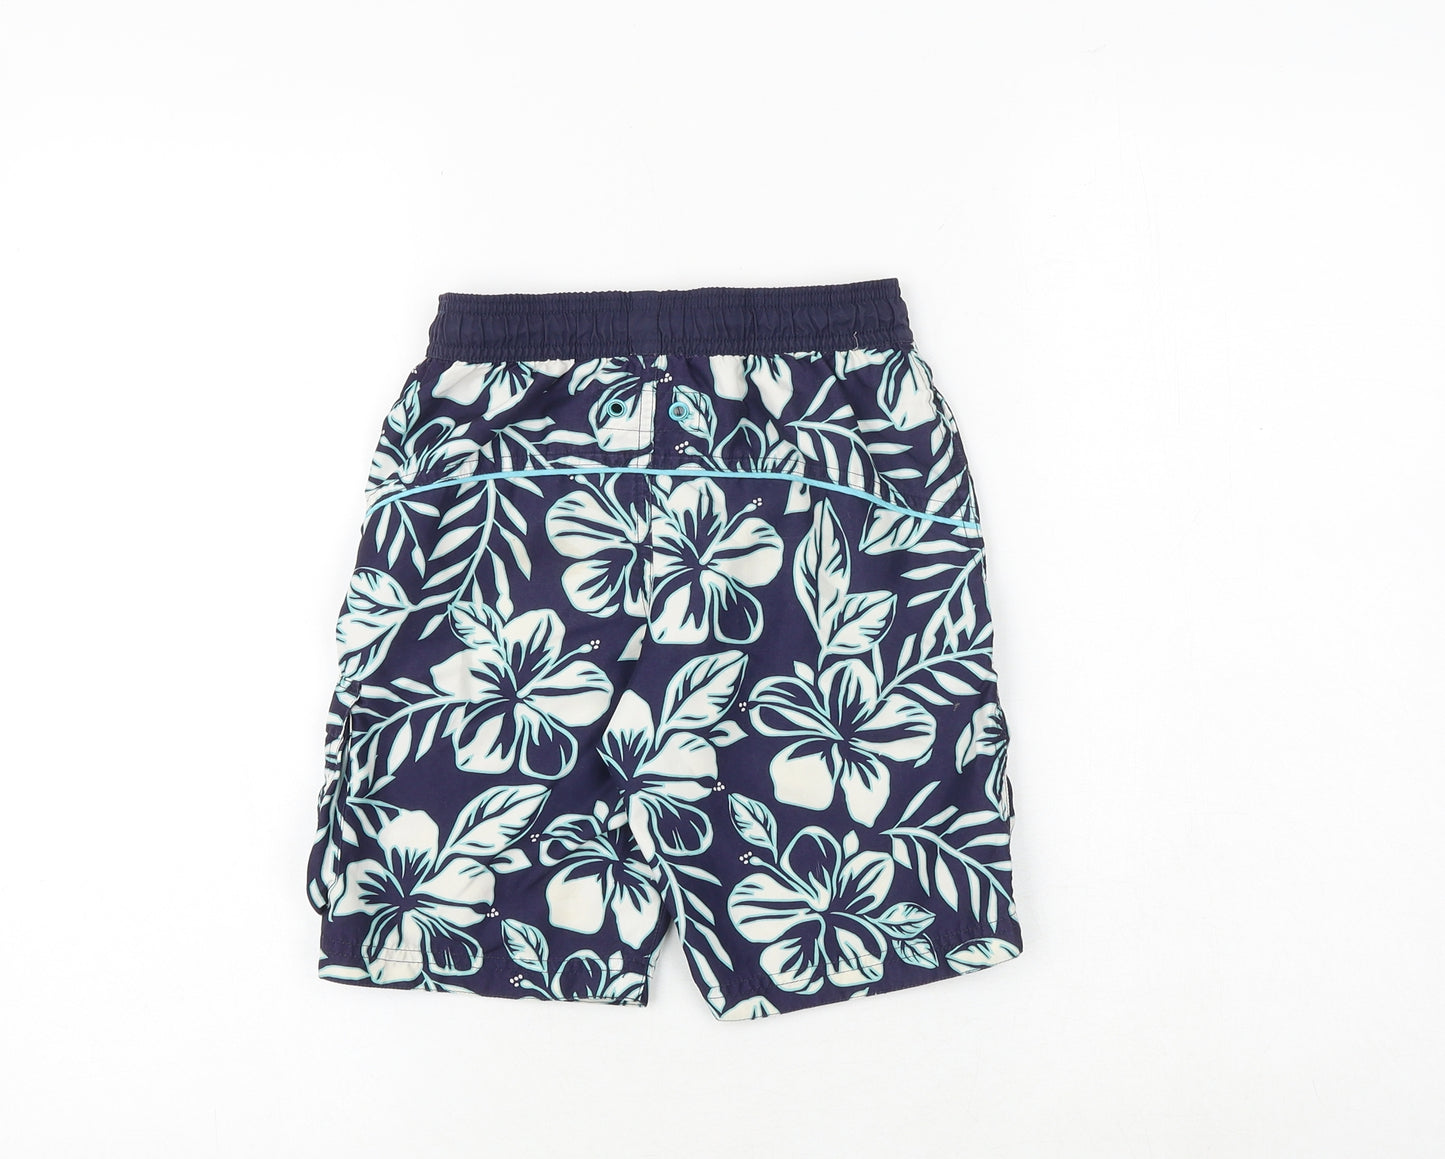 Marks and Spencer Boys Blue Floral Polyester Bermuda Shorts Size 7-8 Years Regular Drawstring